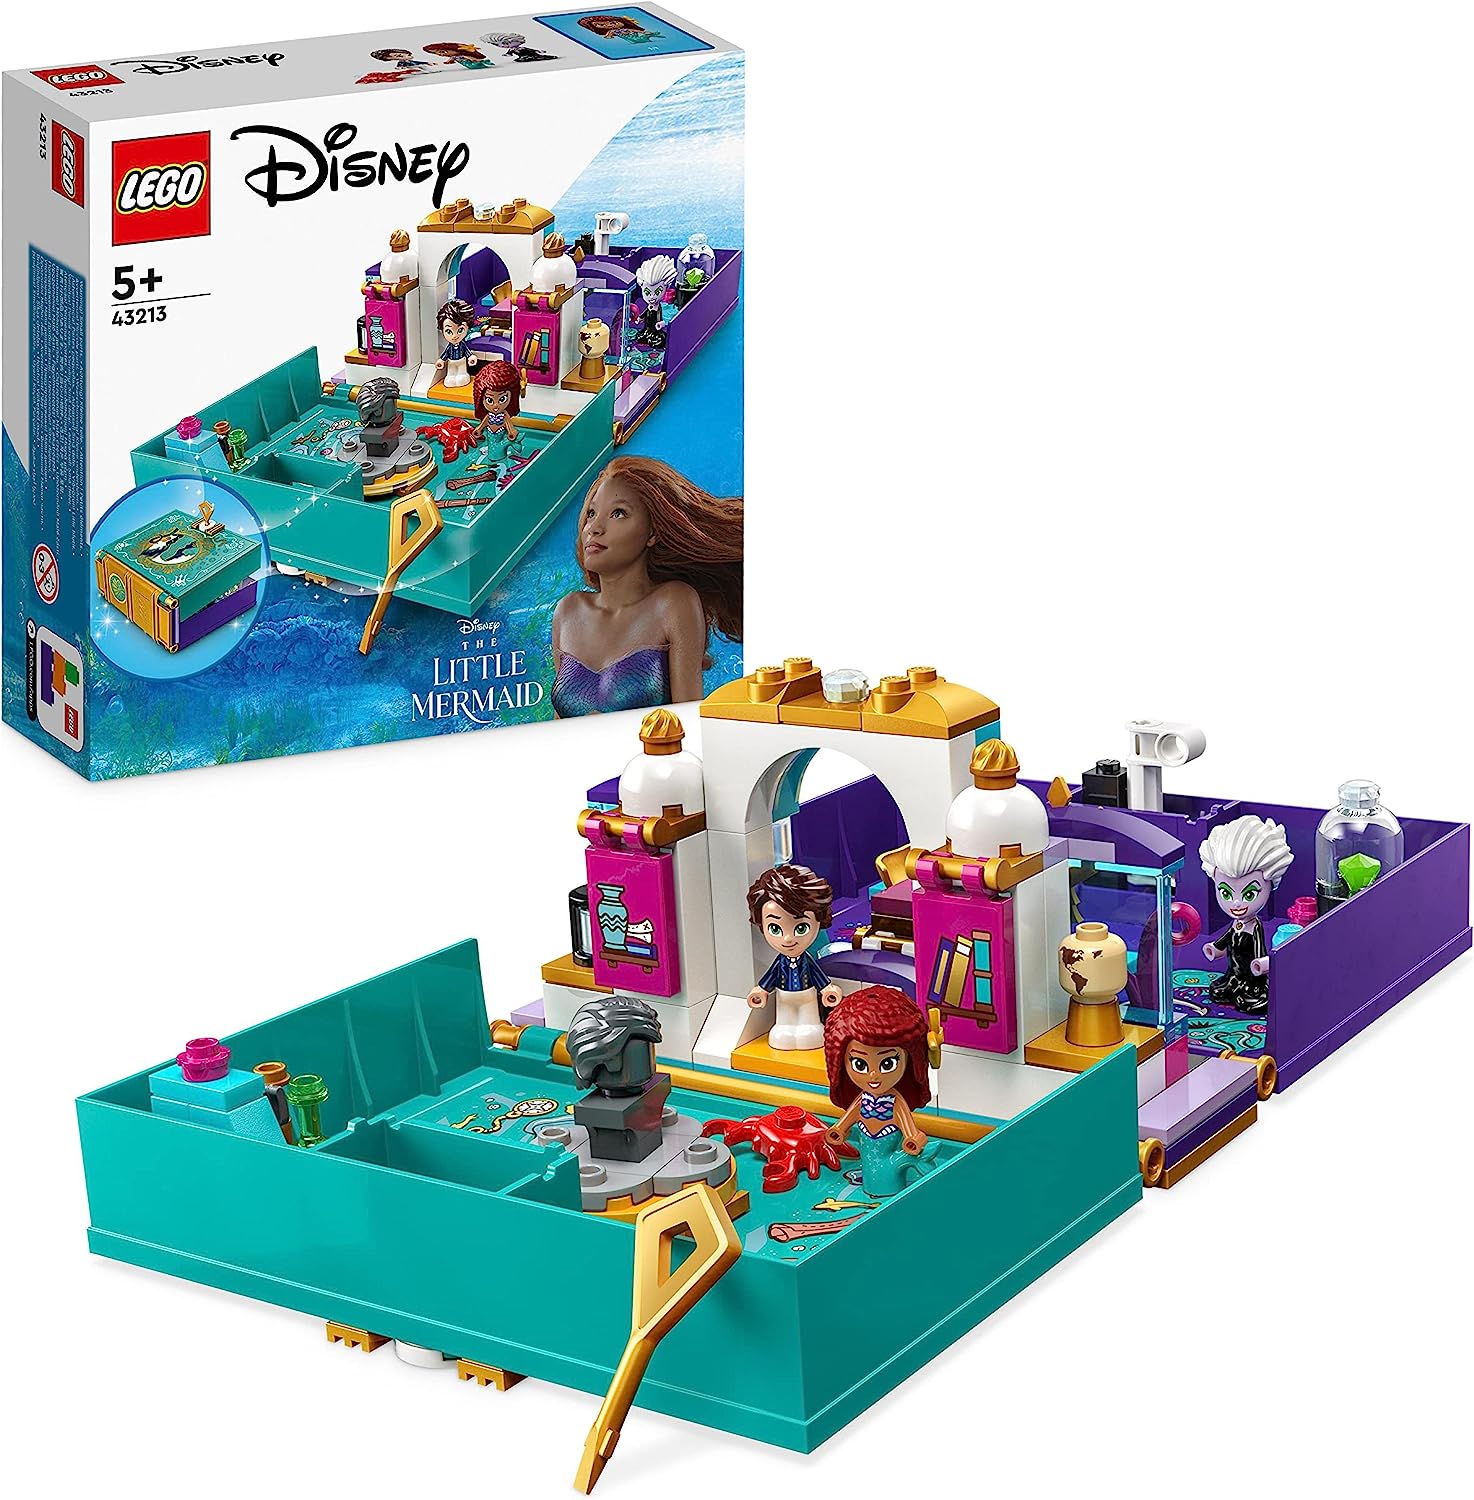 LEGO 43213 Disney Princess the Little Mermaid Fairytale Book Toy for Building for Children, Girls and Boys from 5 years with Ariel and Prince Erik Micro Dolls, 2023 Film